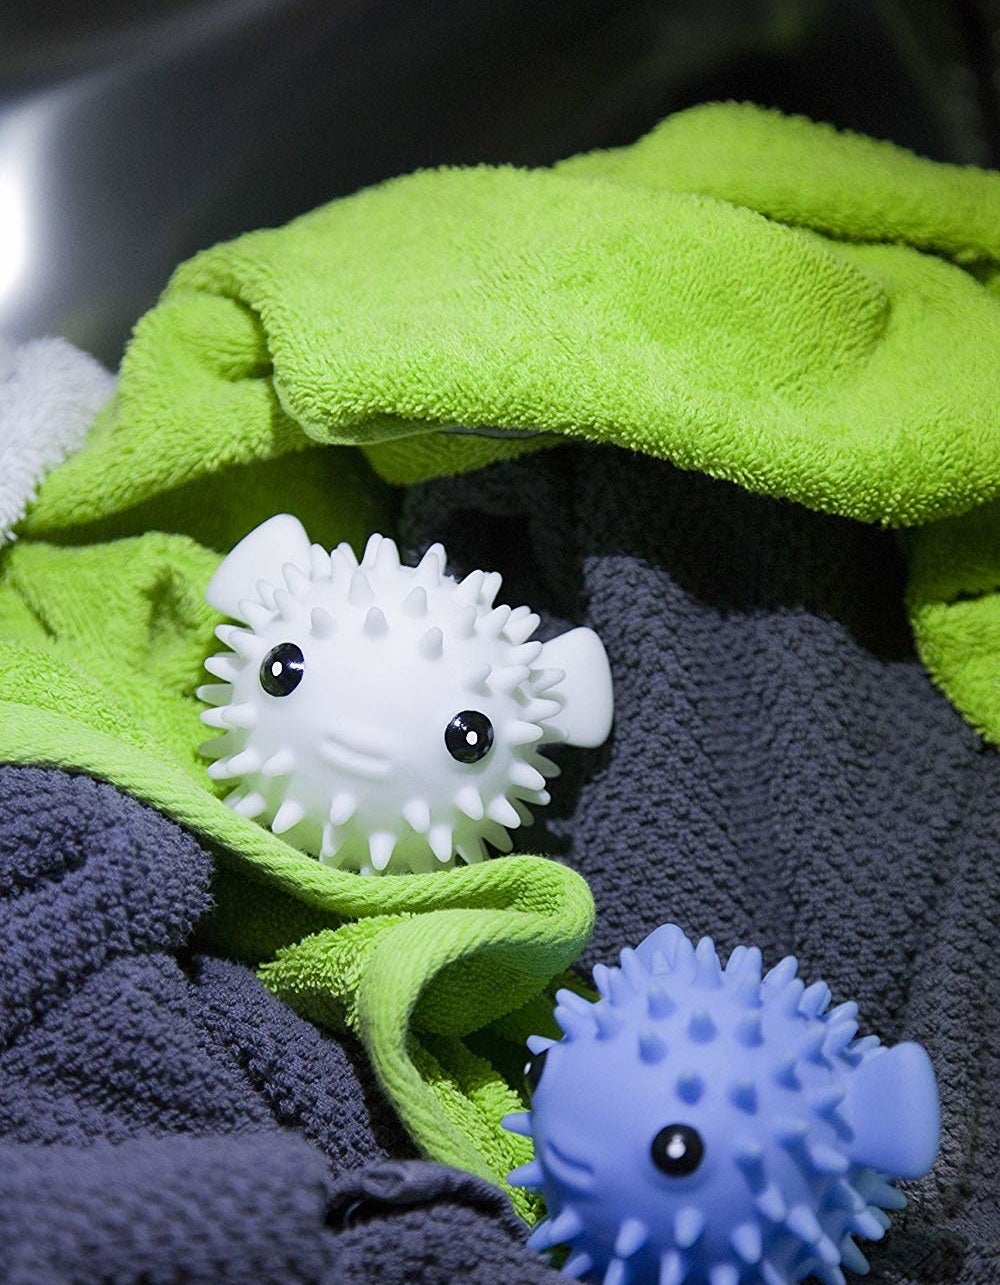 One white and one blue pufferfish nestled in towels